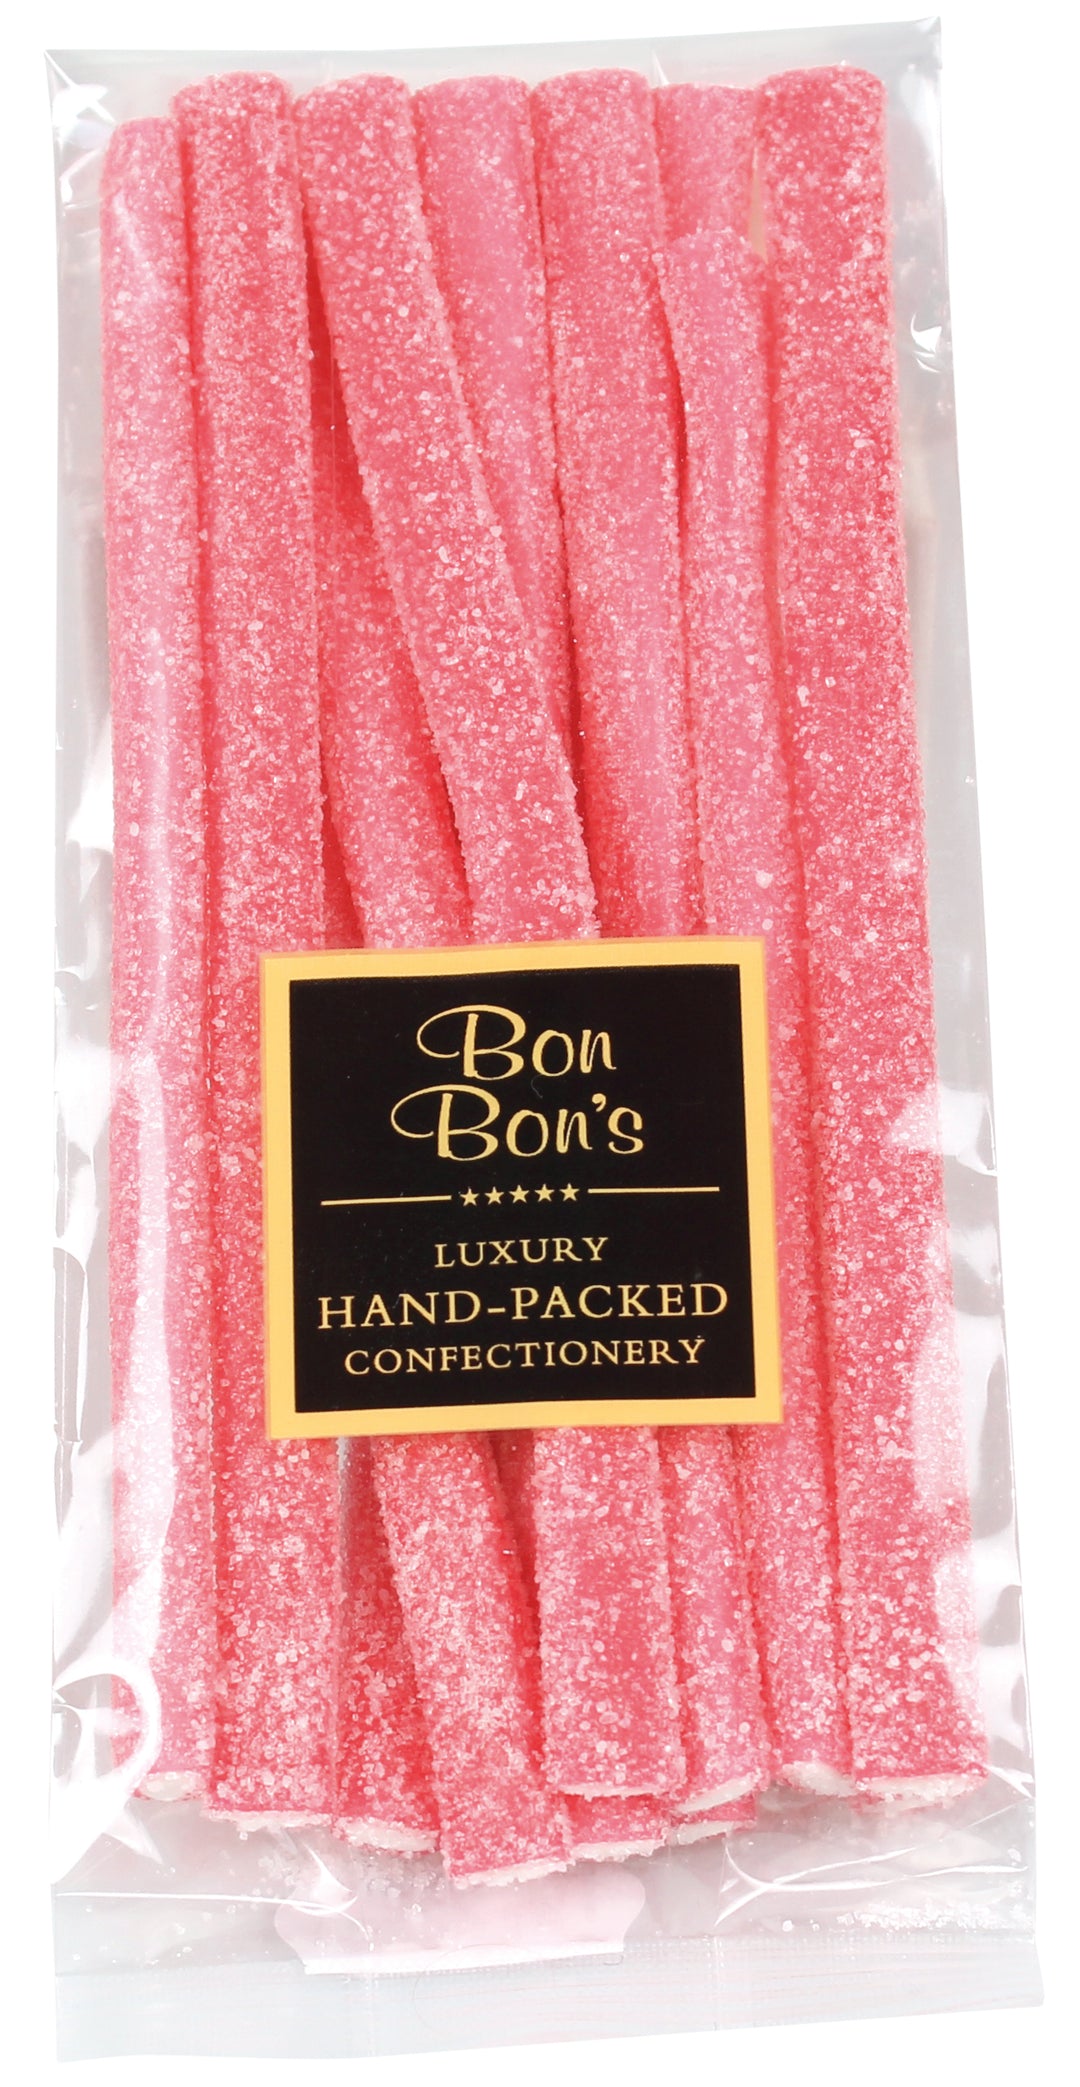 Candy Cables Sour Strawberry Bag 100g